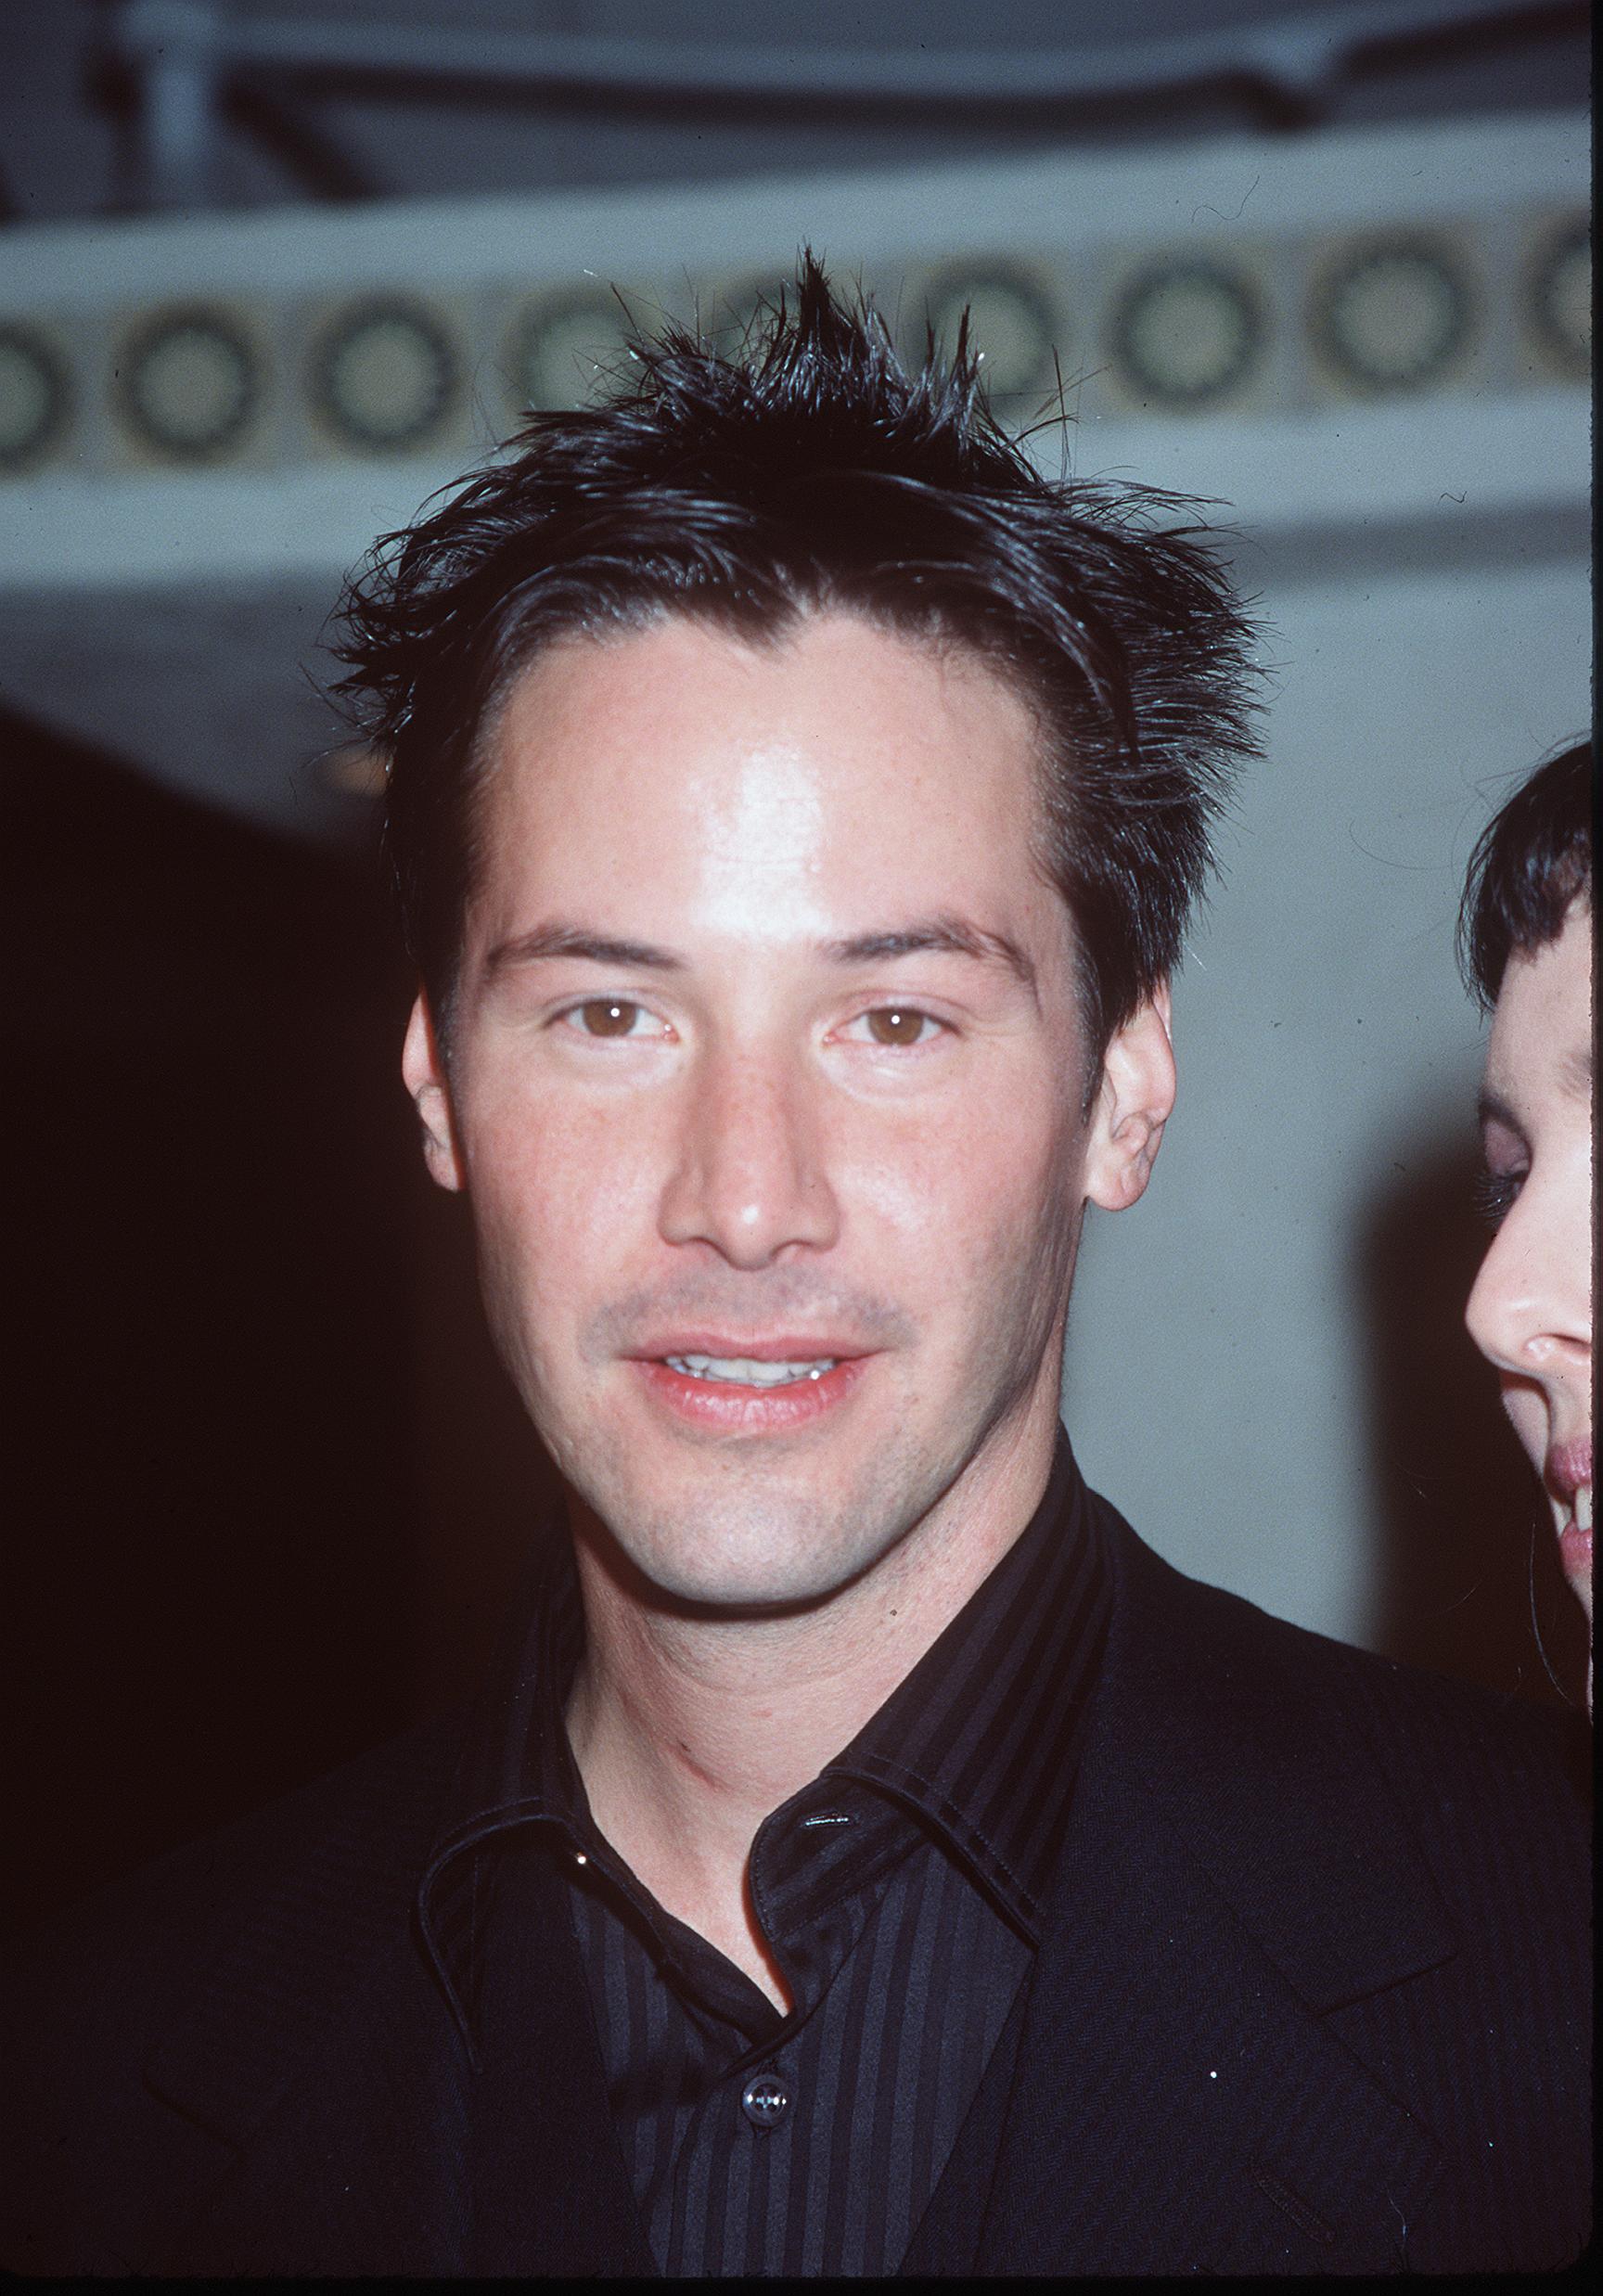 Keanu Reeves in Hollywood im Jahr 1999 | Quelle: Getty Images